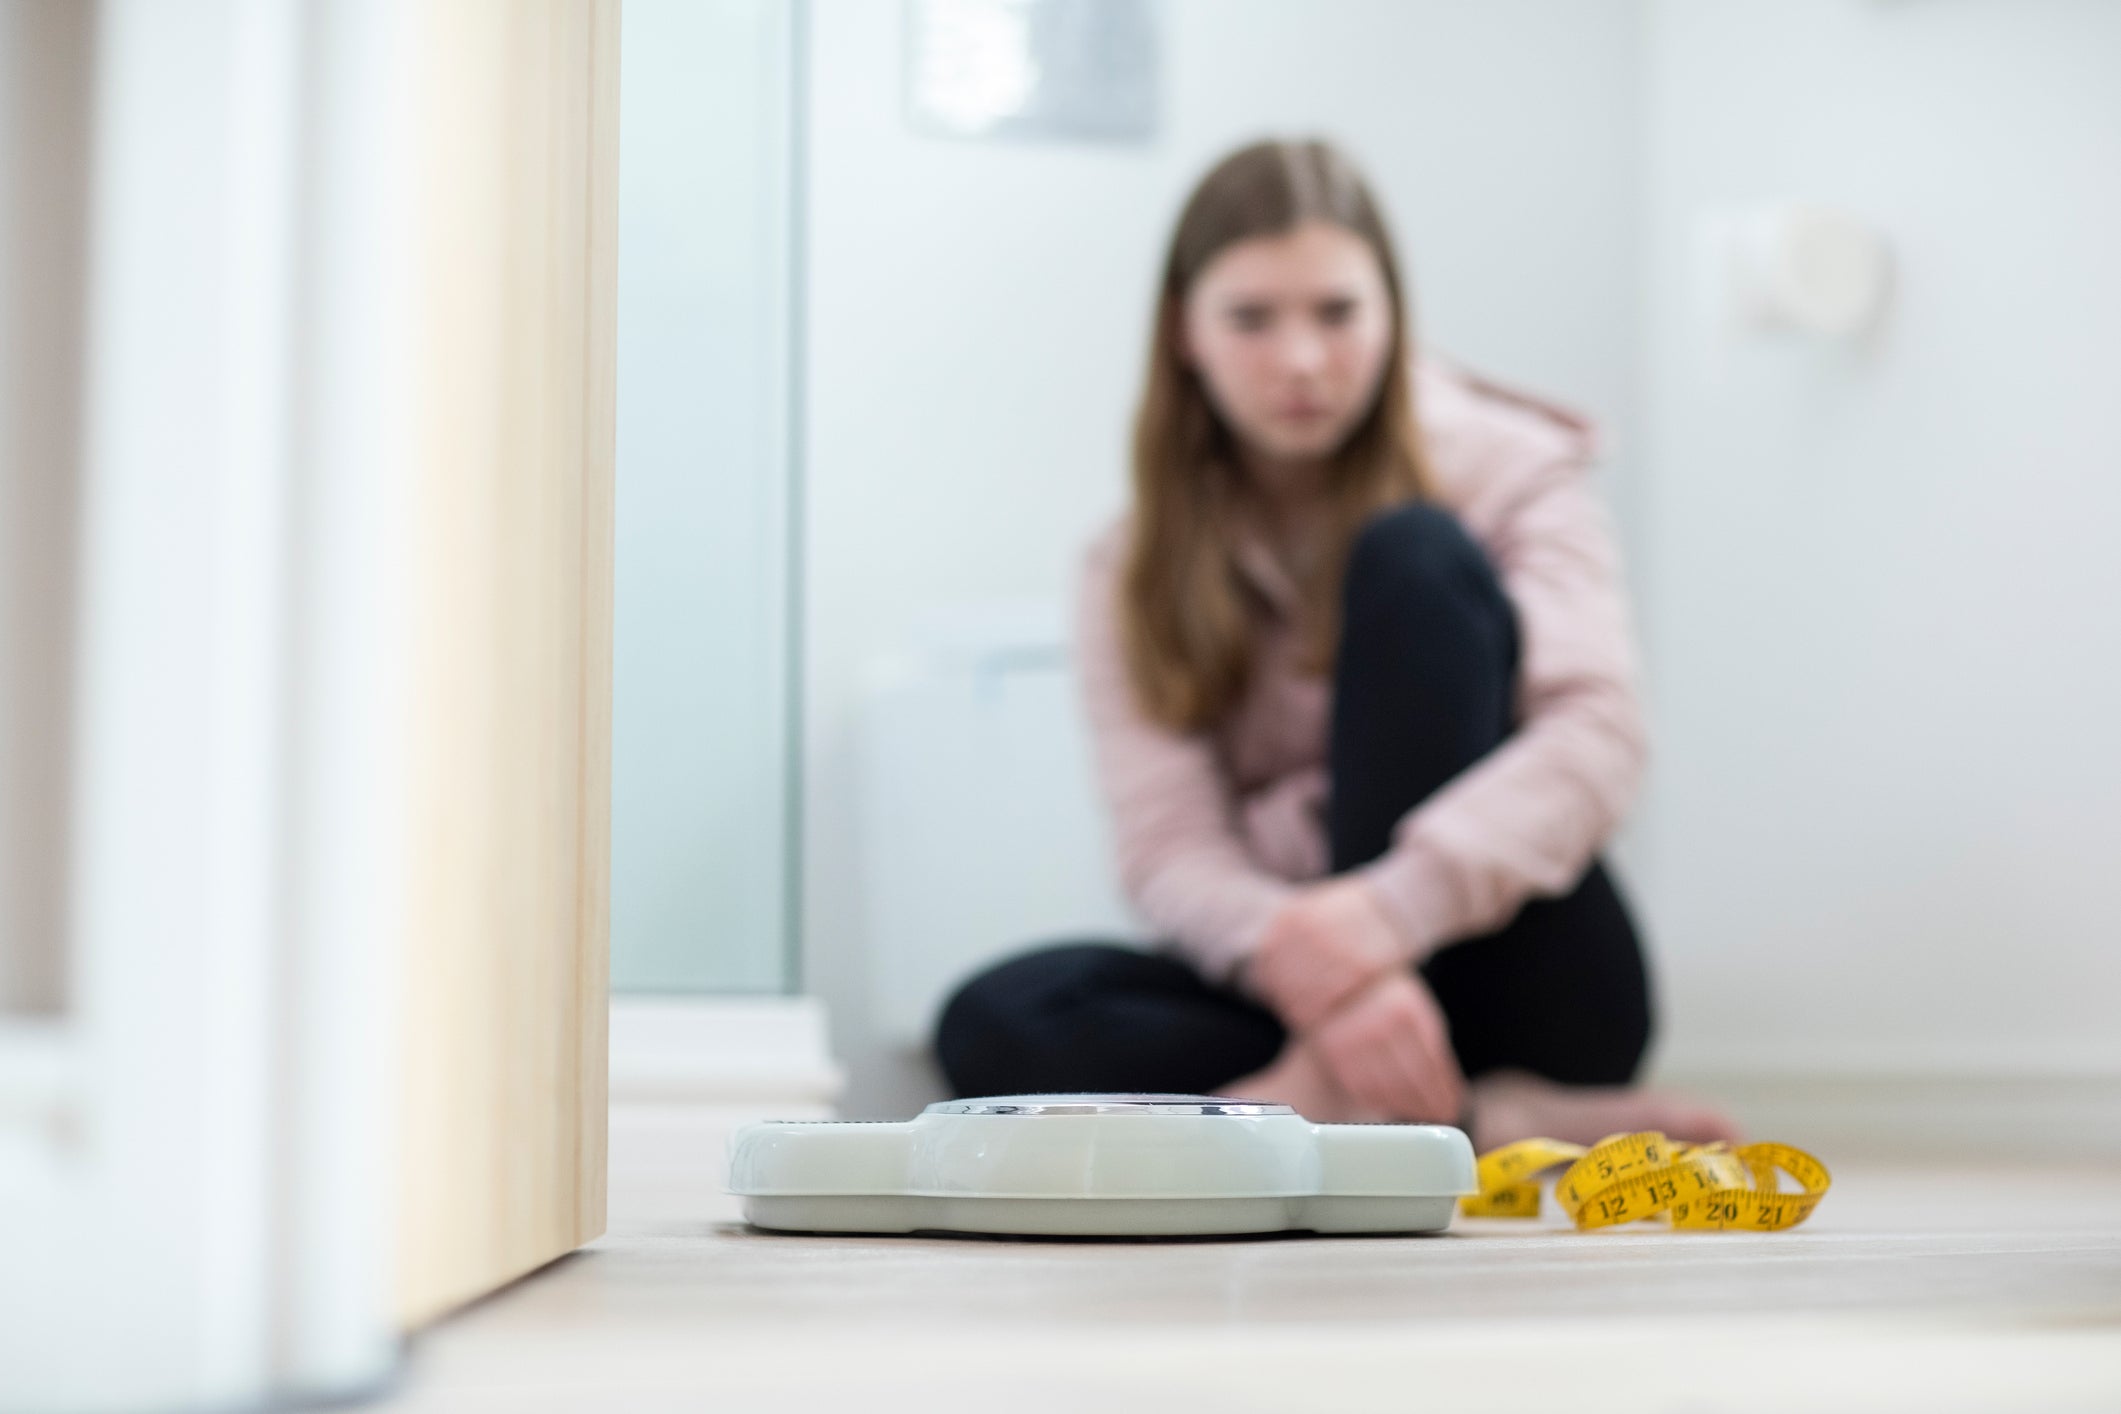 Approximately 1.25 million people in the UK have an eating disorder